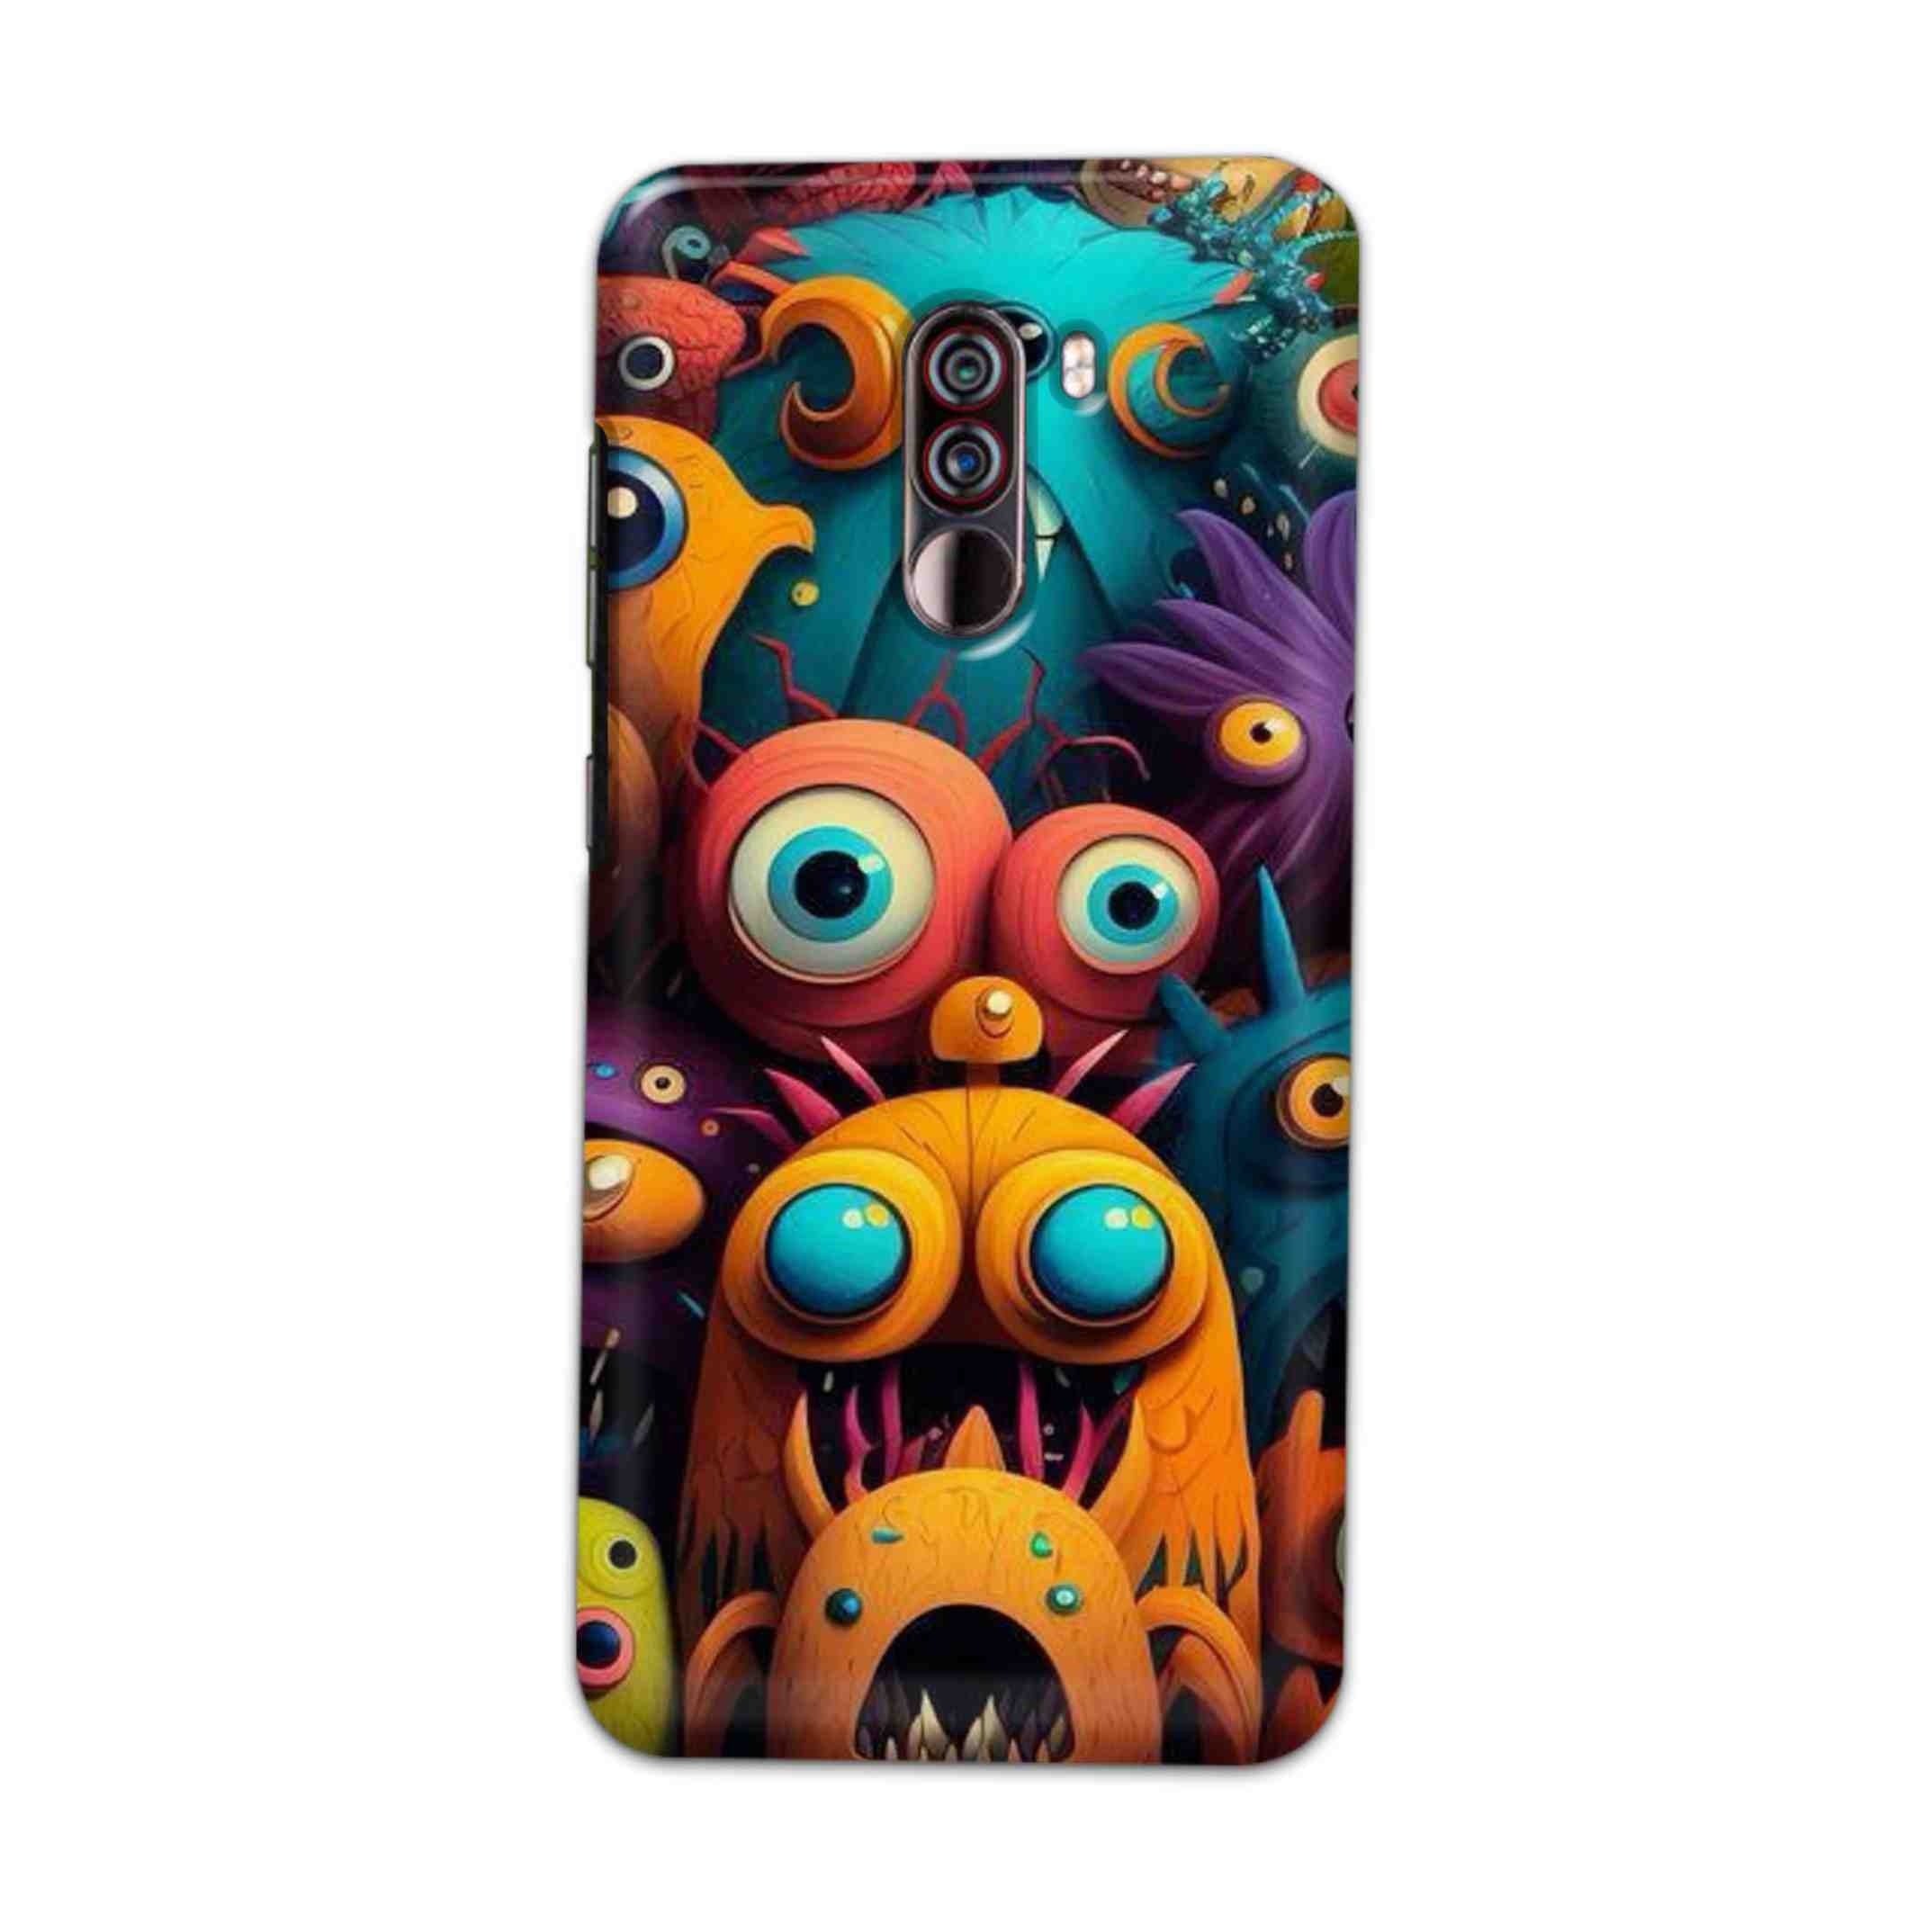 Buy Zombie Hard Back Mobile Phone Case Cover For Xiaomi Pocophone F1 Online